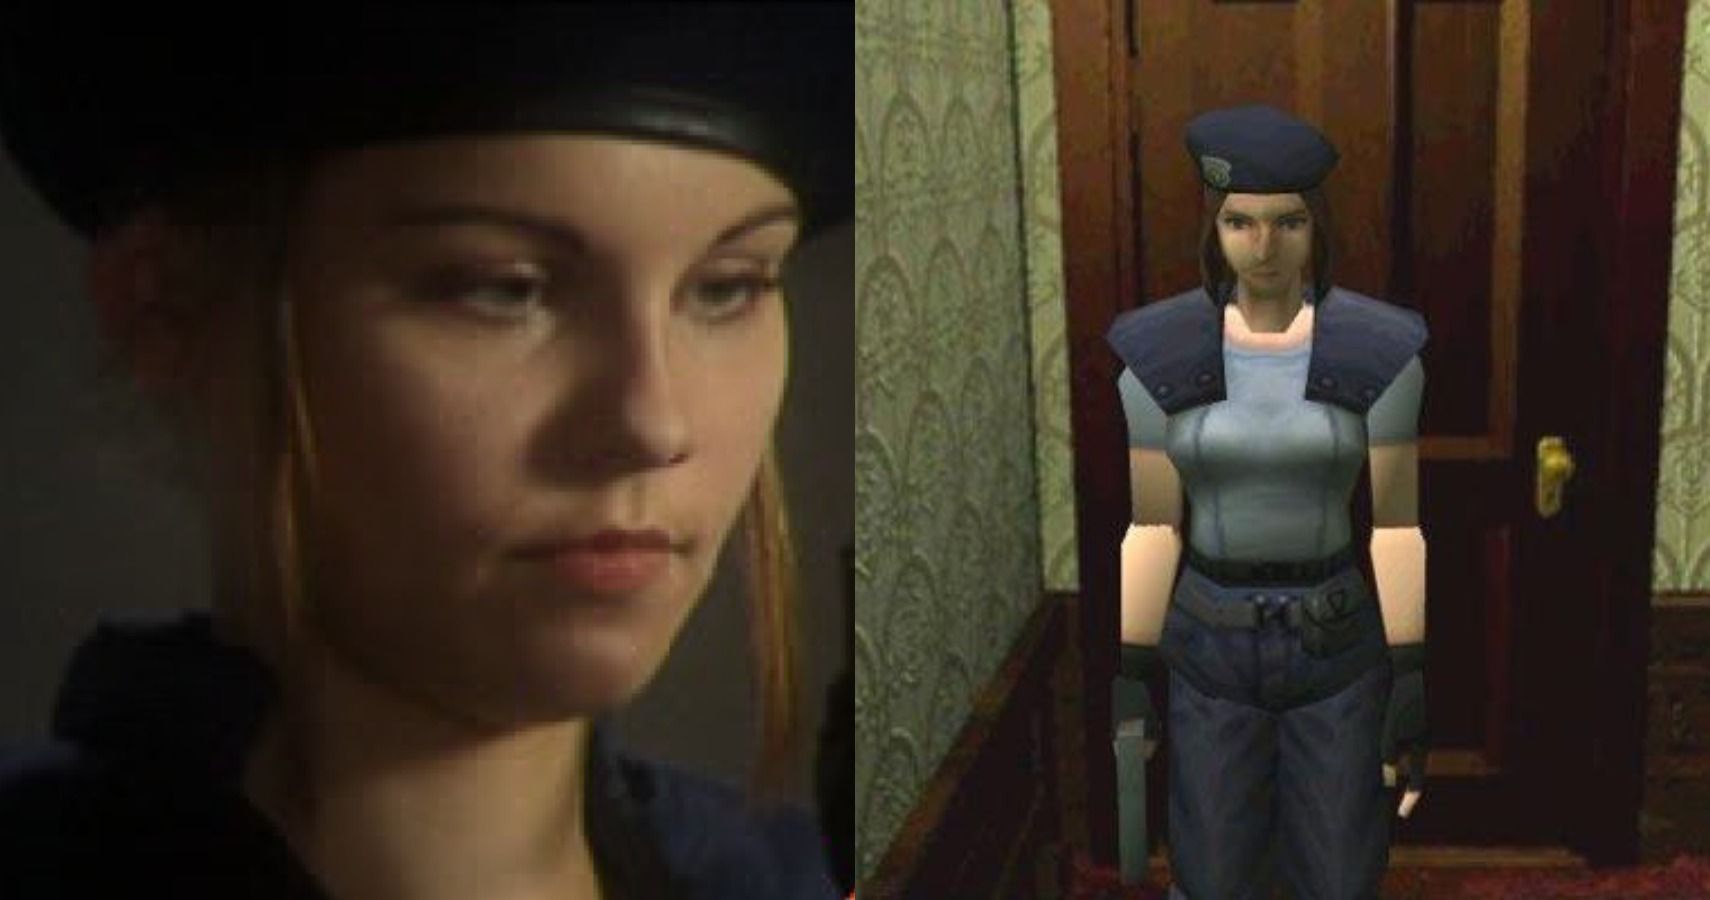 Jill Valentine's Original Actress From Resident Evil Has Been Found